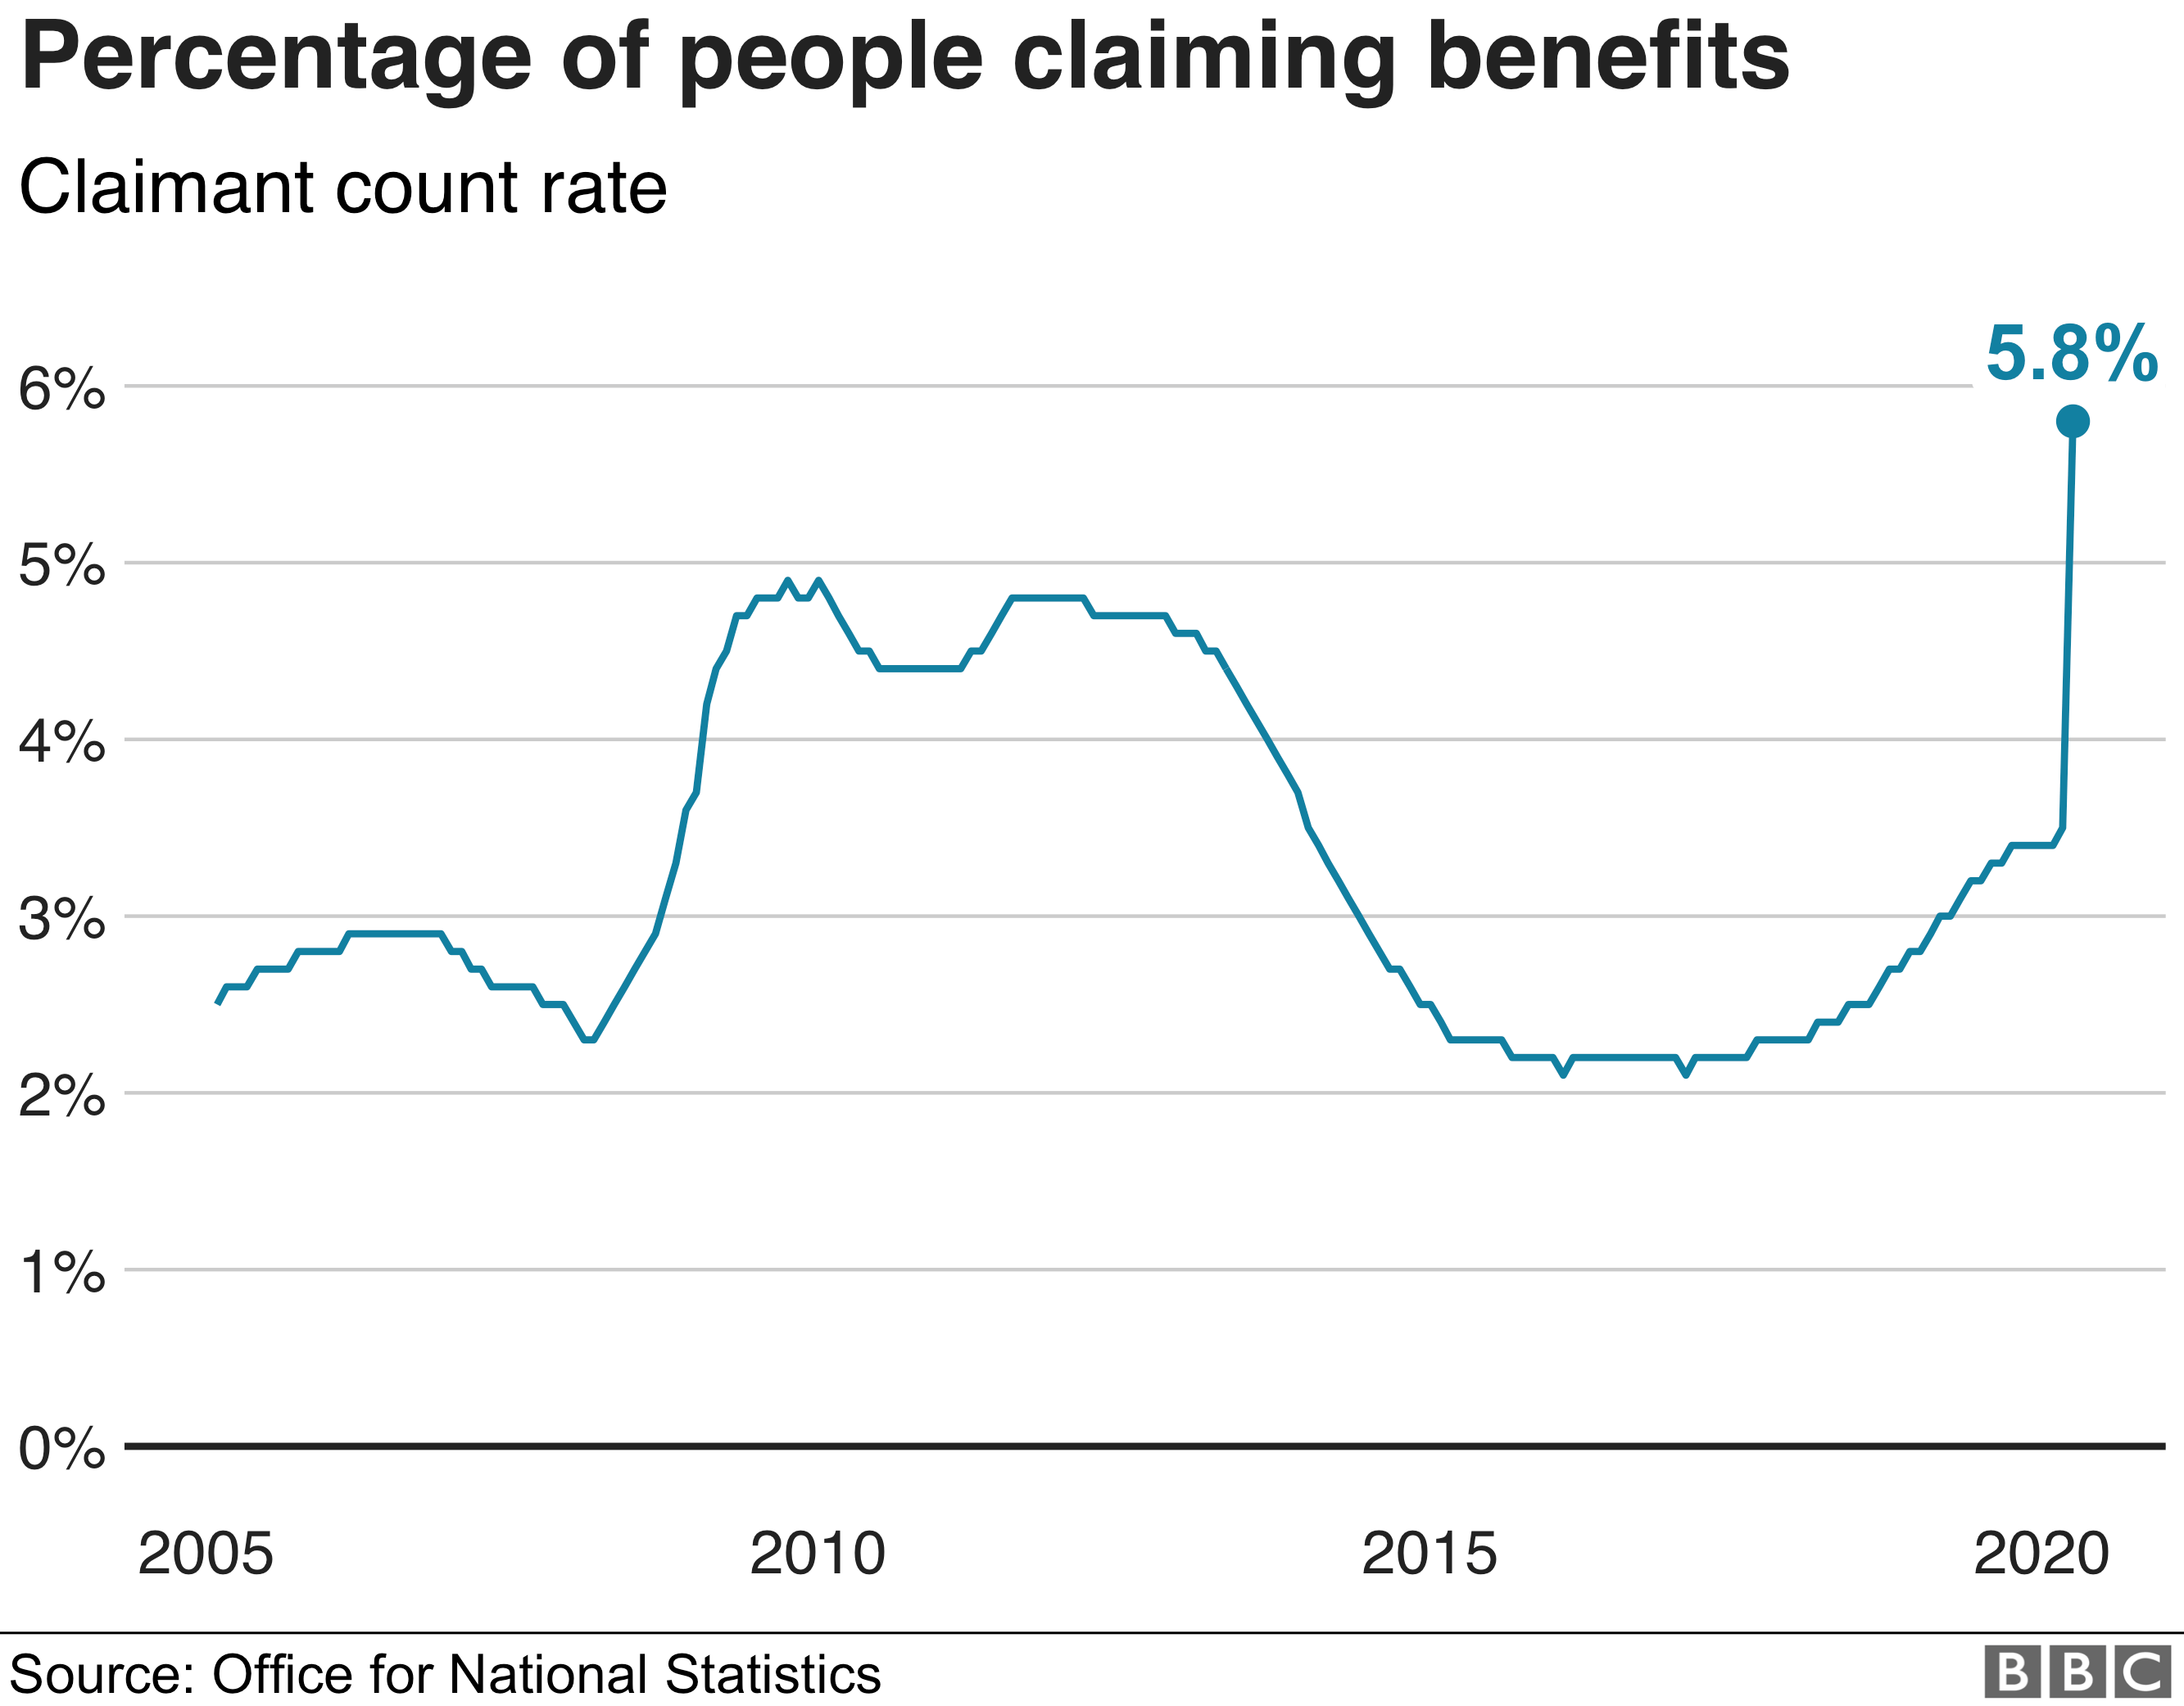 Claimant count